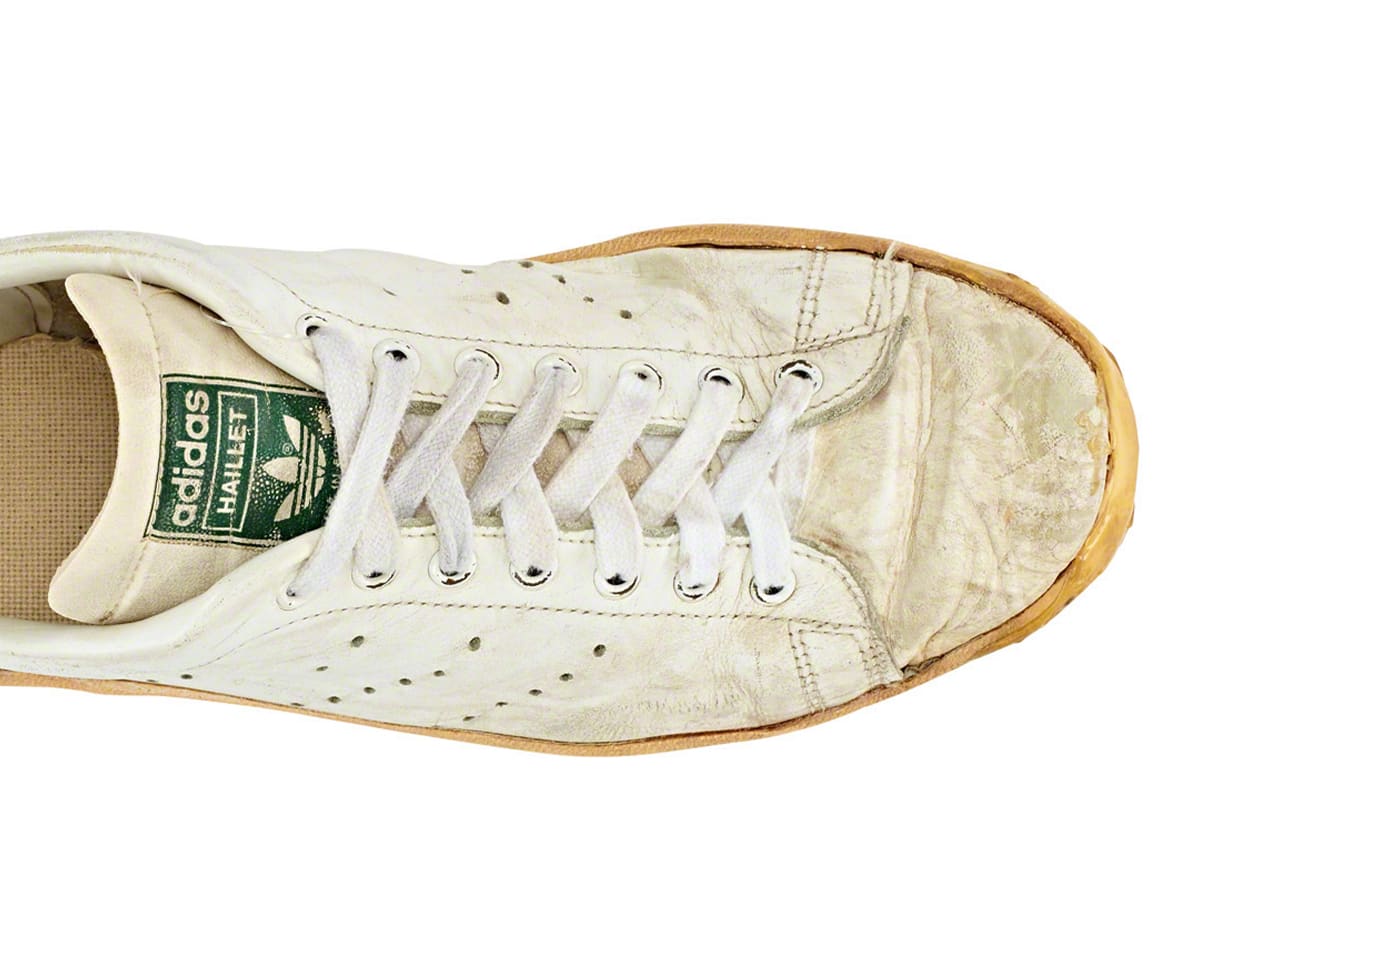 stan smith special edition 2019